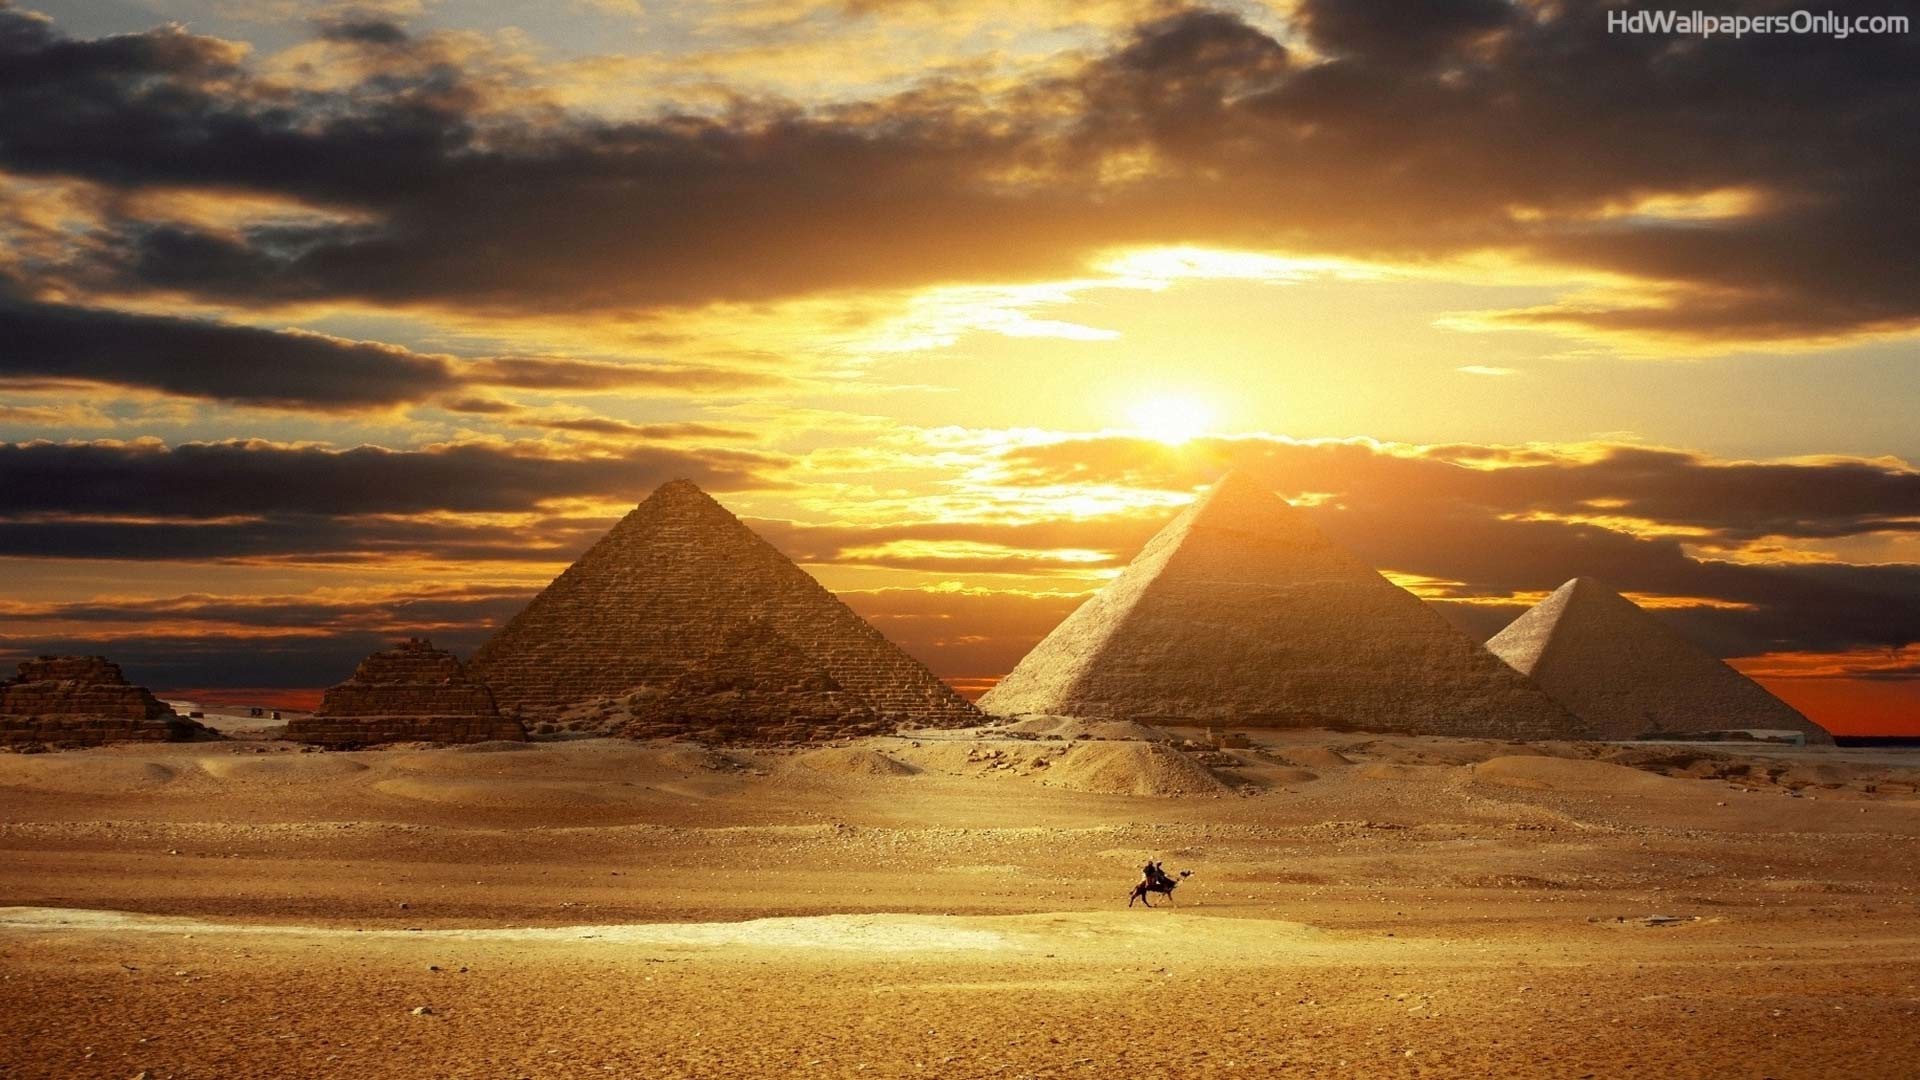 1920x1080 Ancient Egypt Pyramids HD Photos & Wallpapers Pyramids of Egypt.HD .